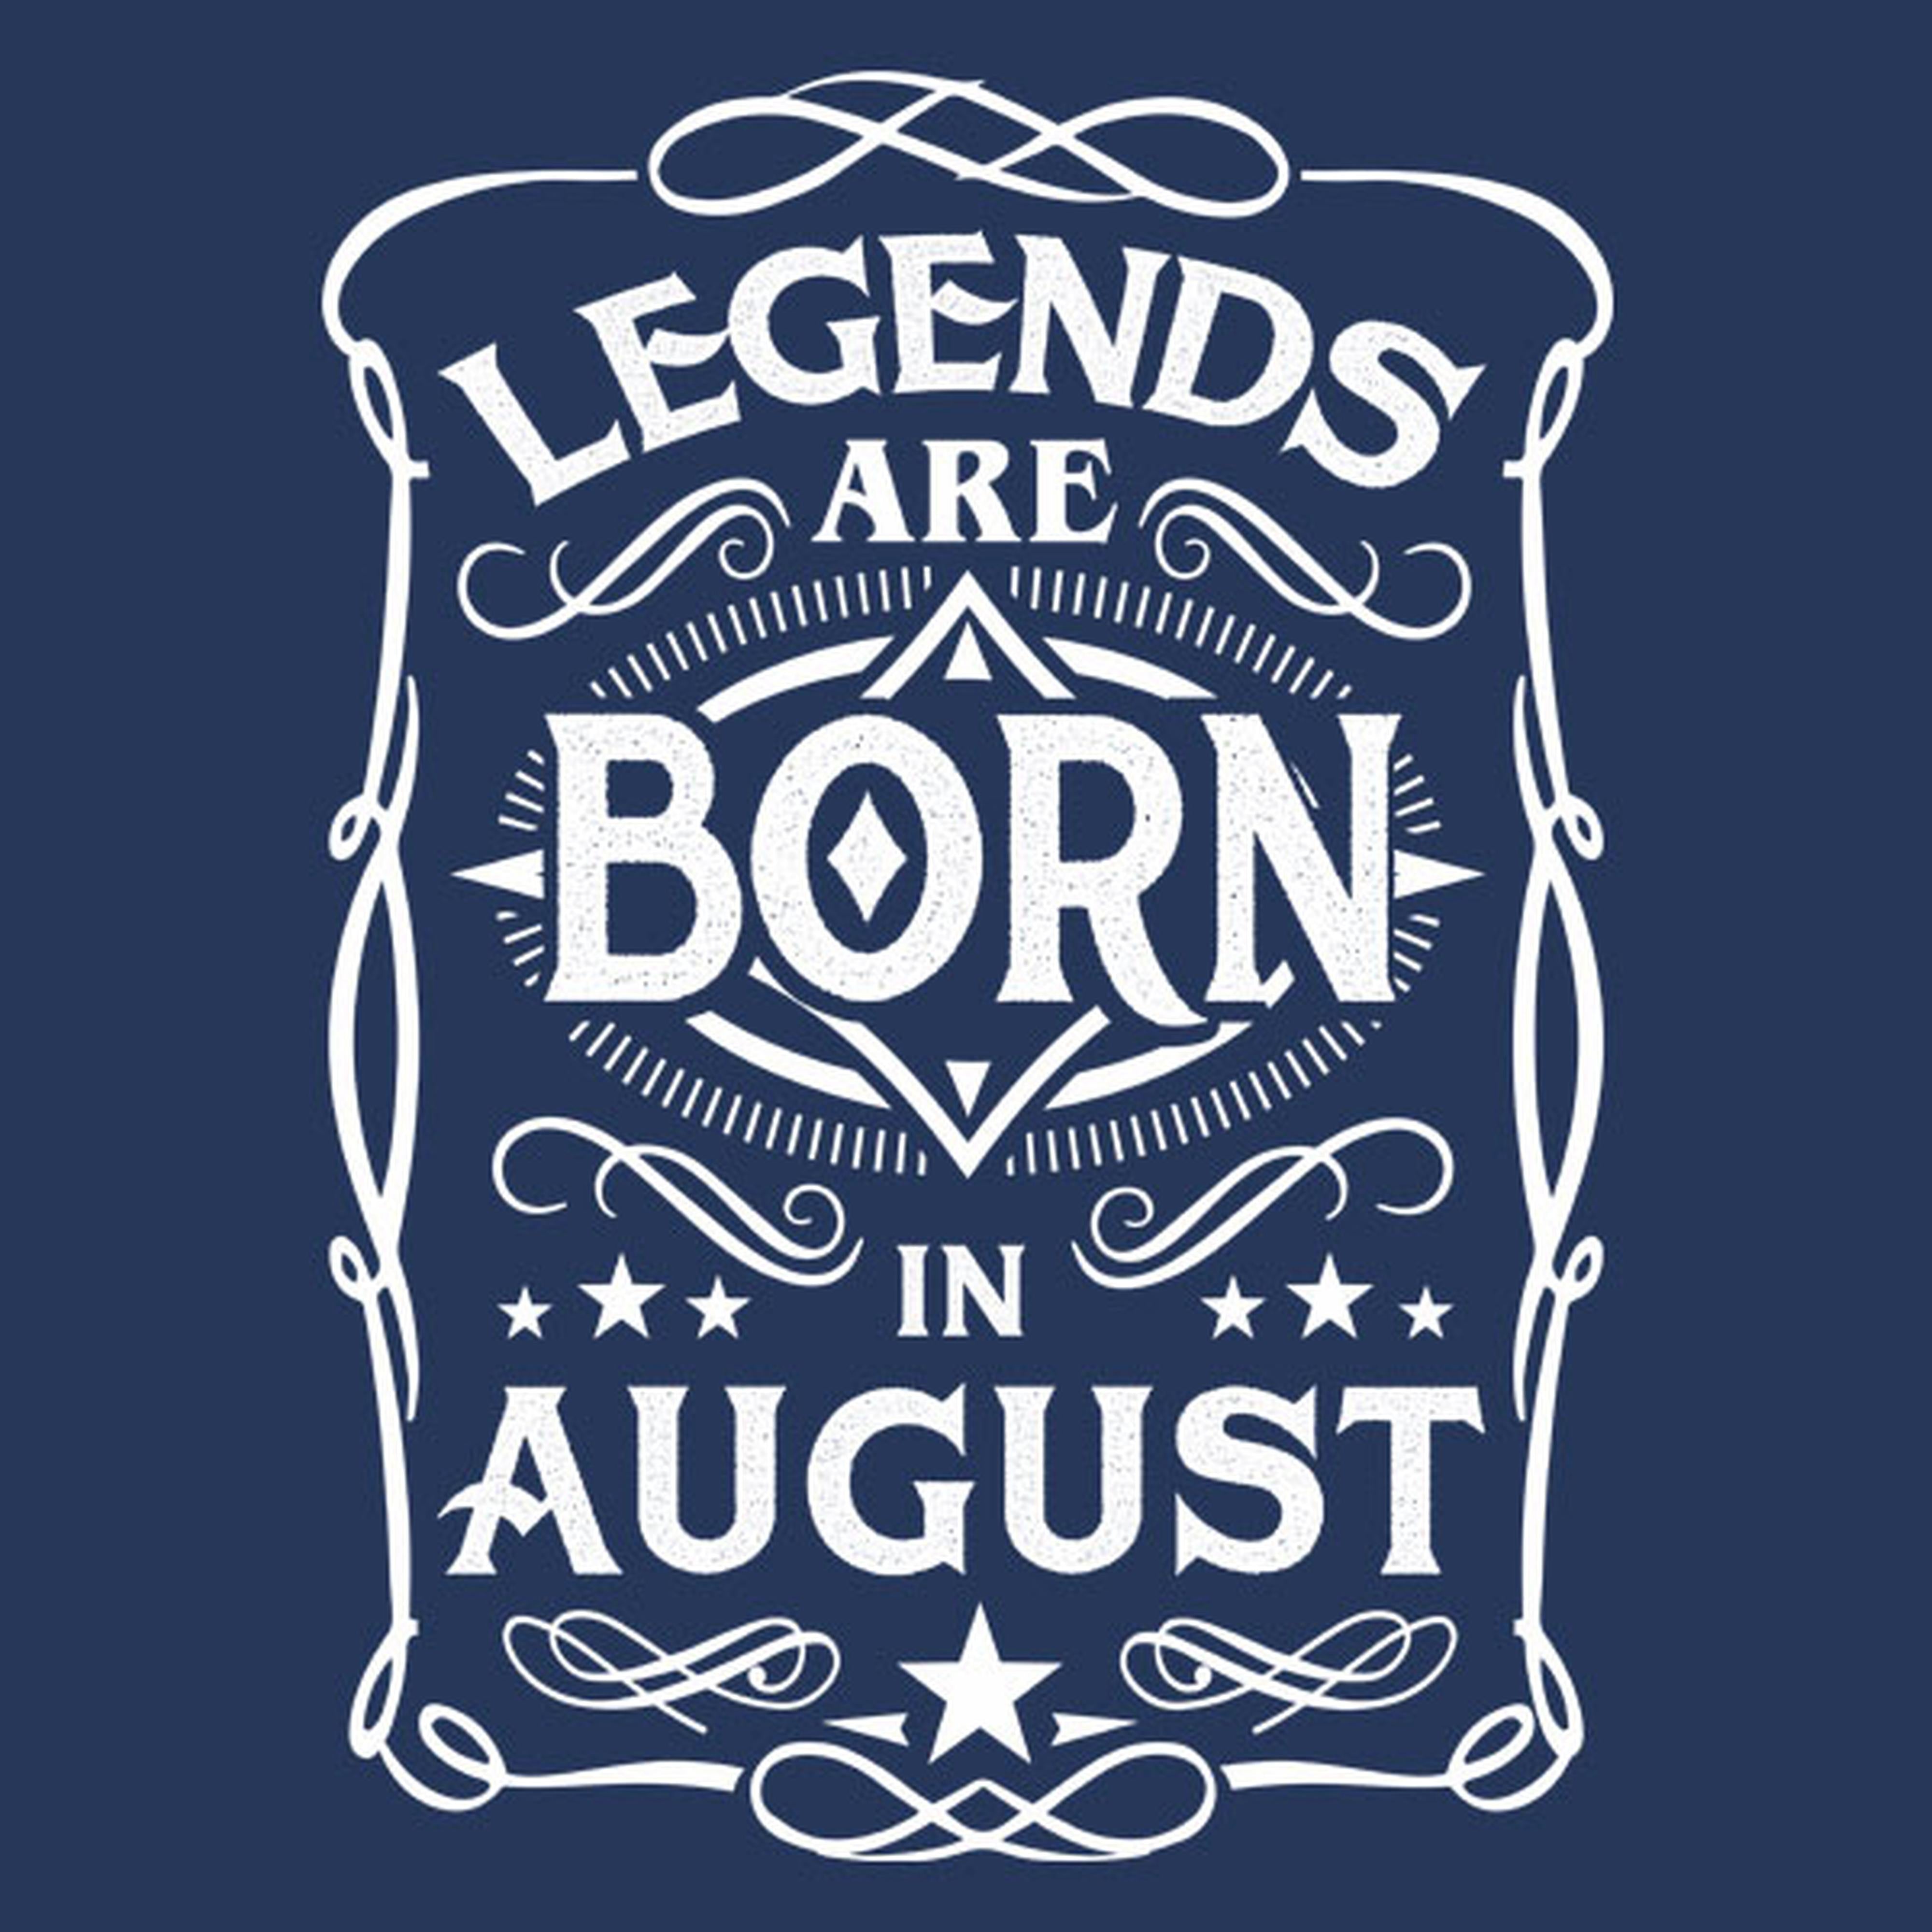 Legends are born in August - T-shirt